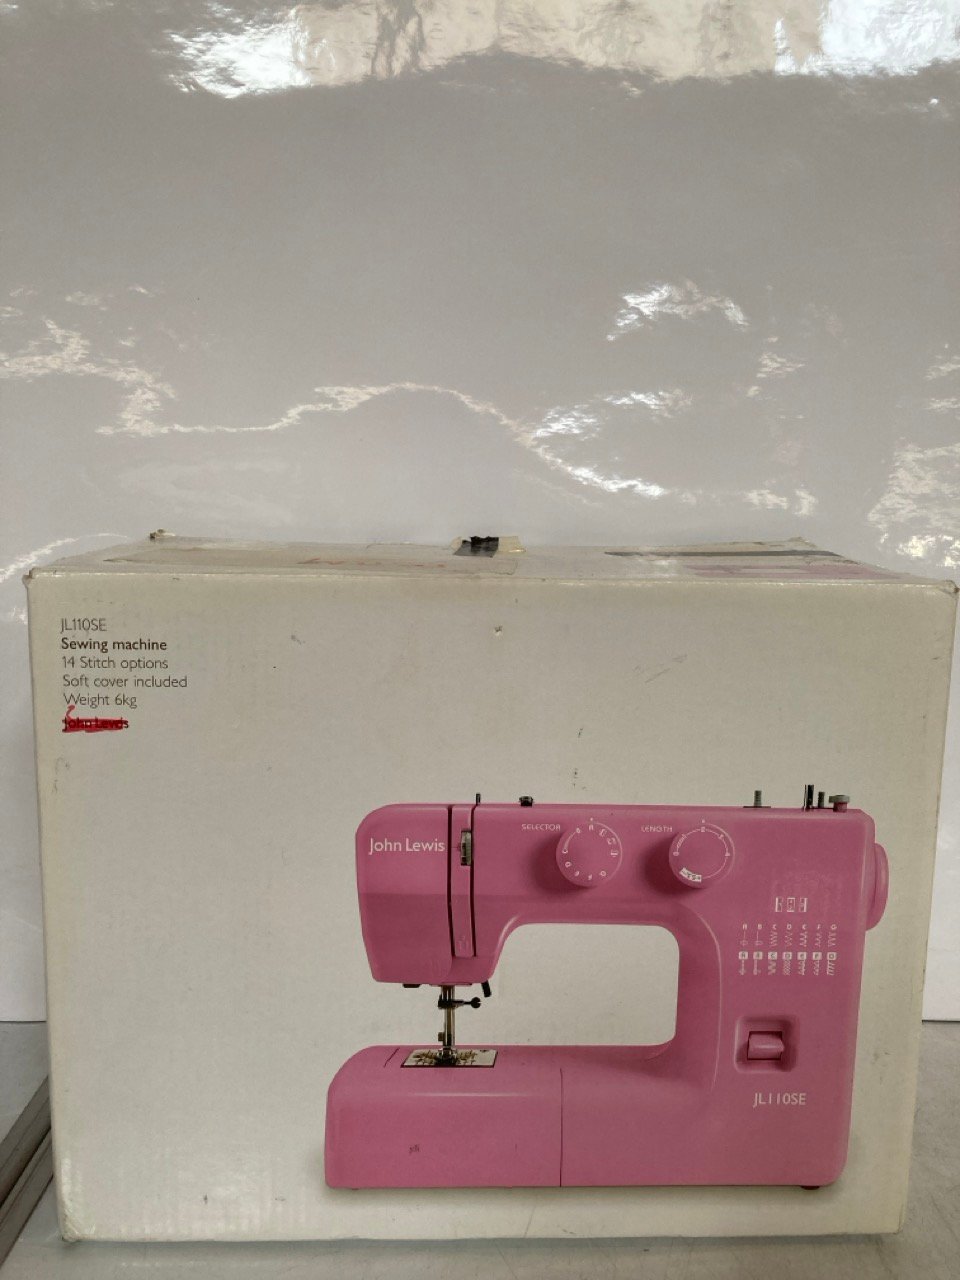 1 X JOHN LEWIS SEWING MACHINE, SOFT COVER INCLUDED, JL110SE